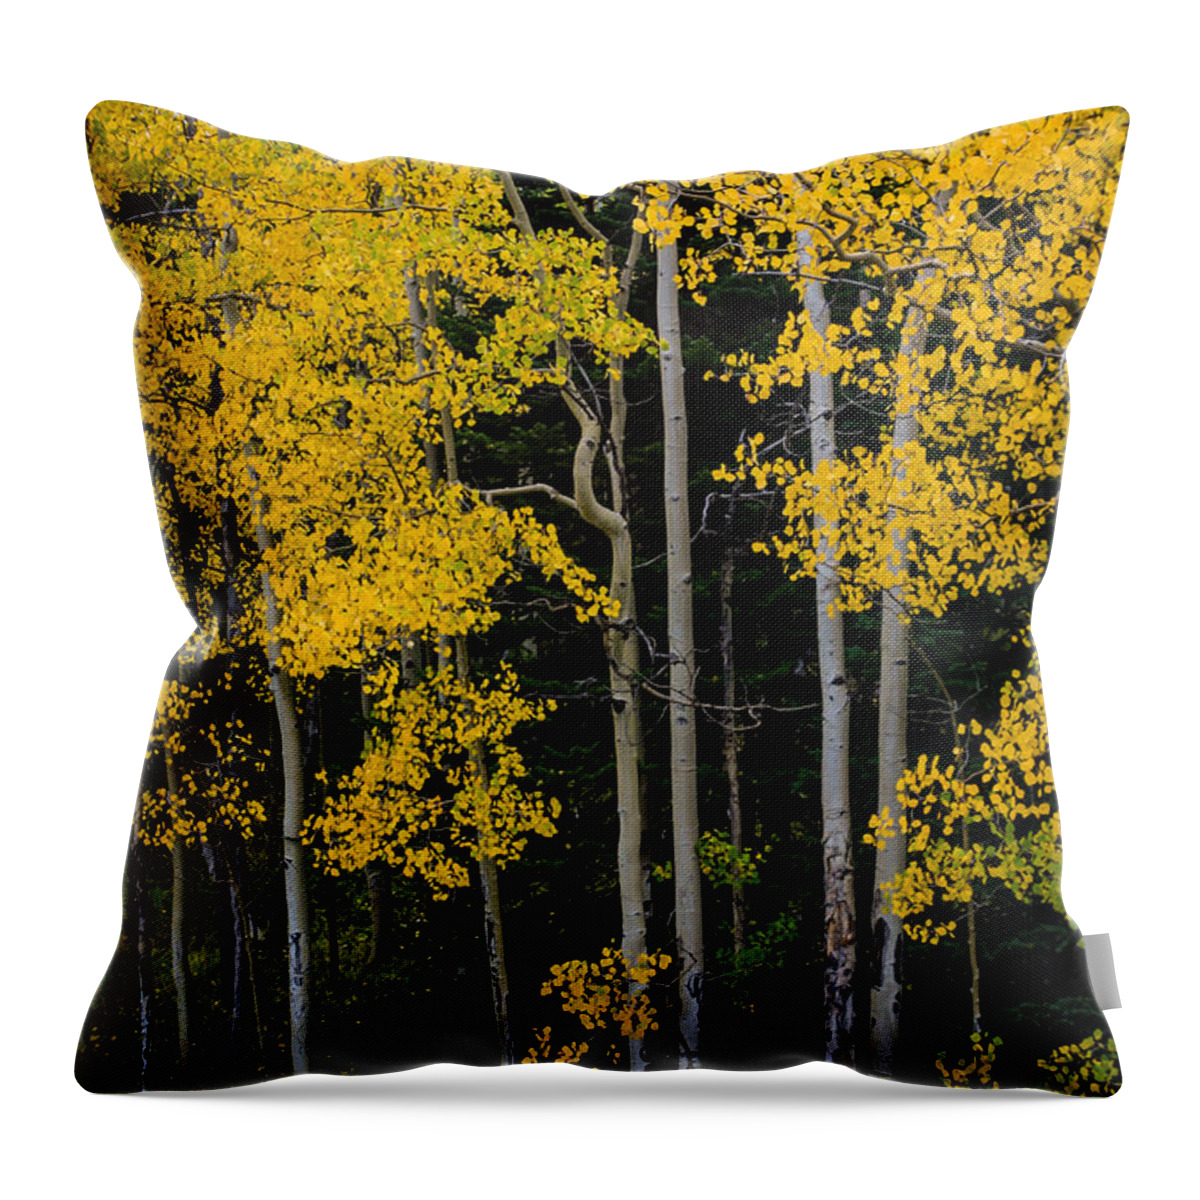 Jay Stockhaus Throw Pillow featuring the photograph Aspens by Jay Stockhaus